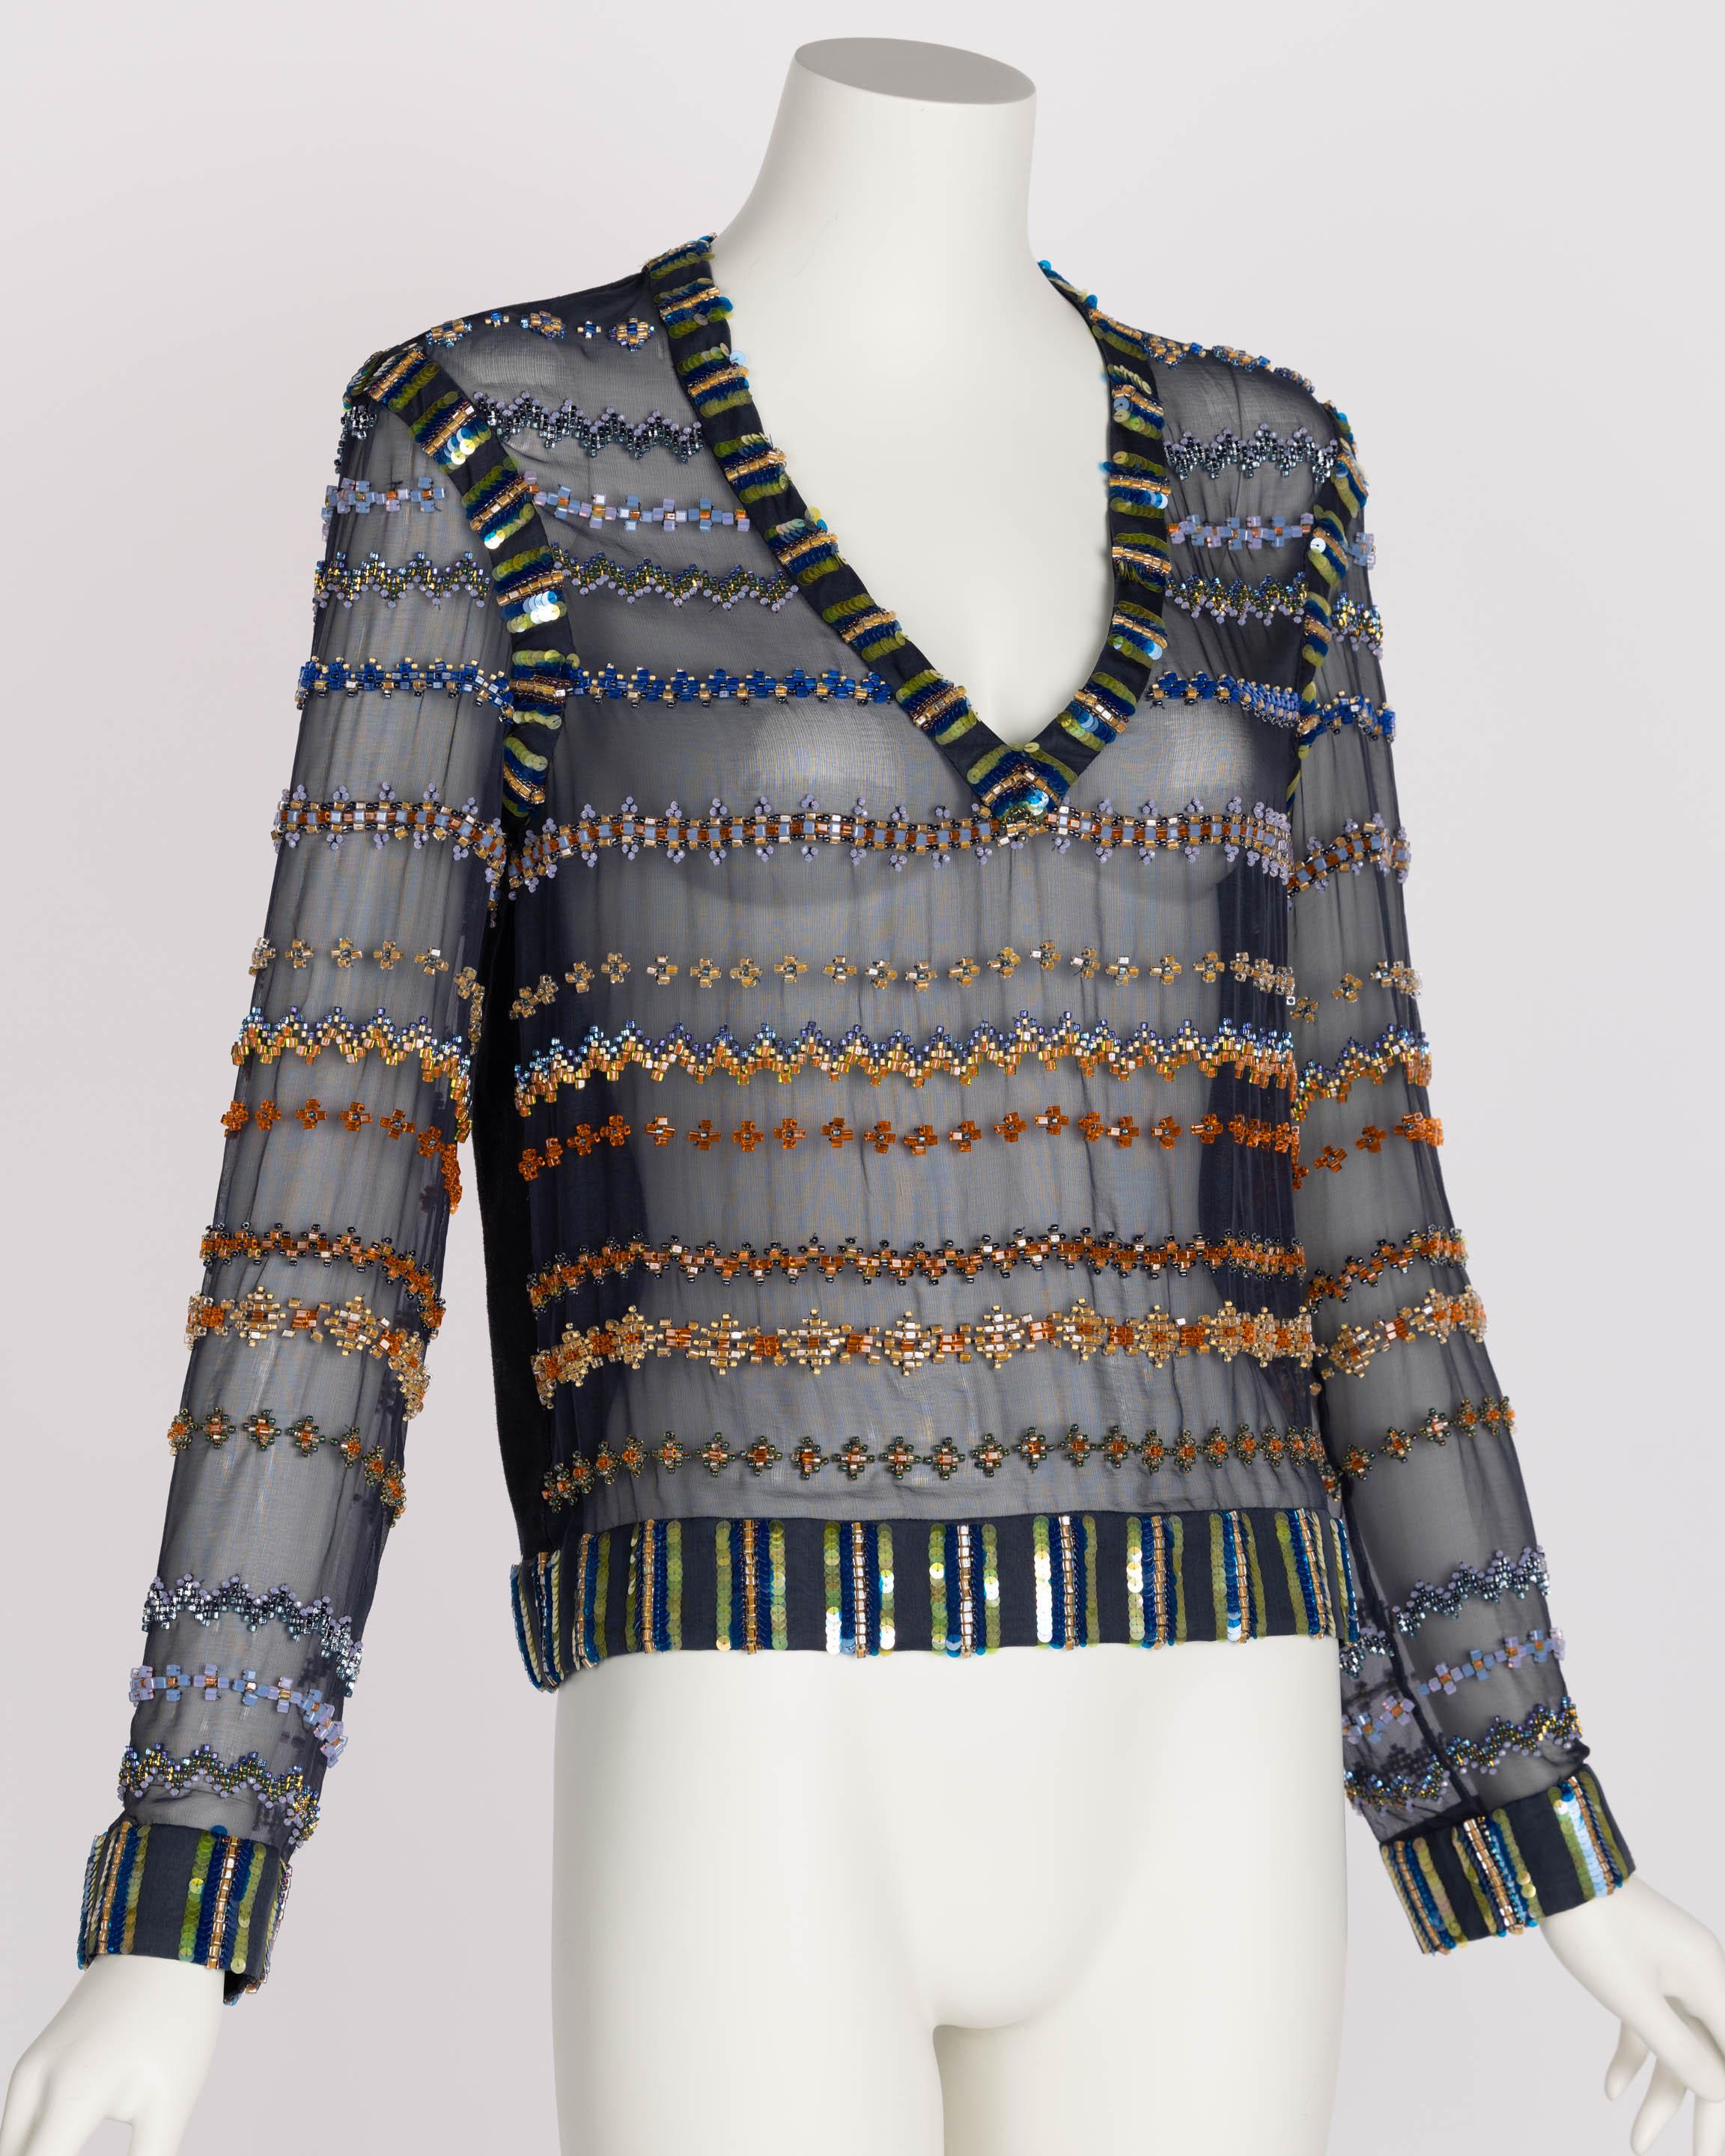  Chanel Métiers d’Art Silk & Leather Beaded Sequin Deep V Top, 2013 In Excellent Condition For Sale In Boca Raton, FL